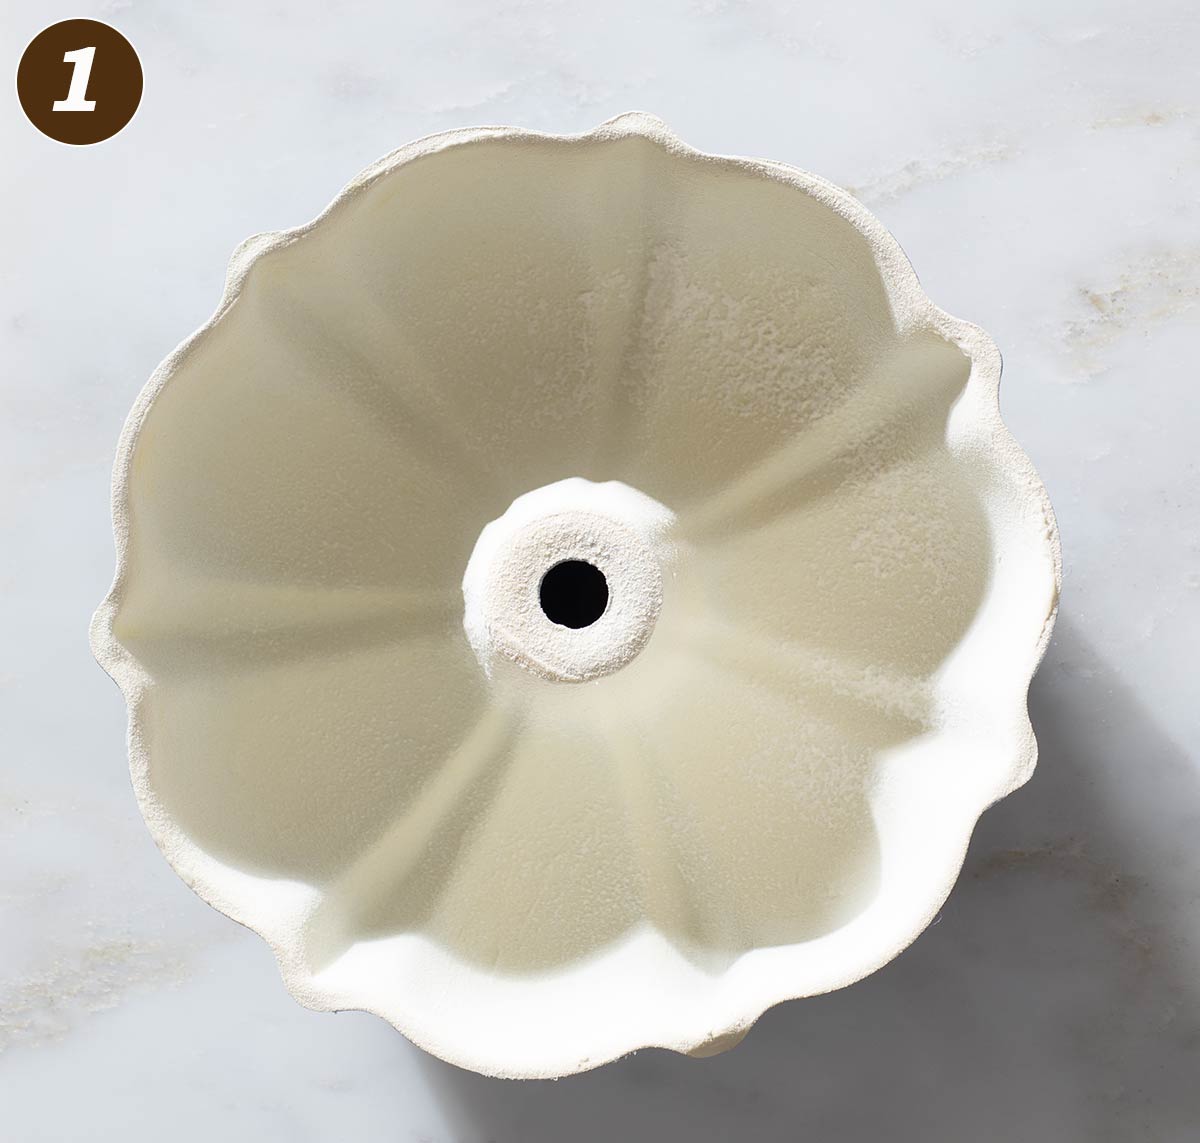 Greased bundt cake pan on a table.